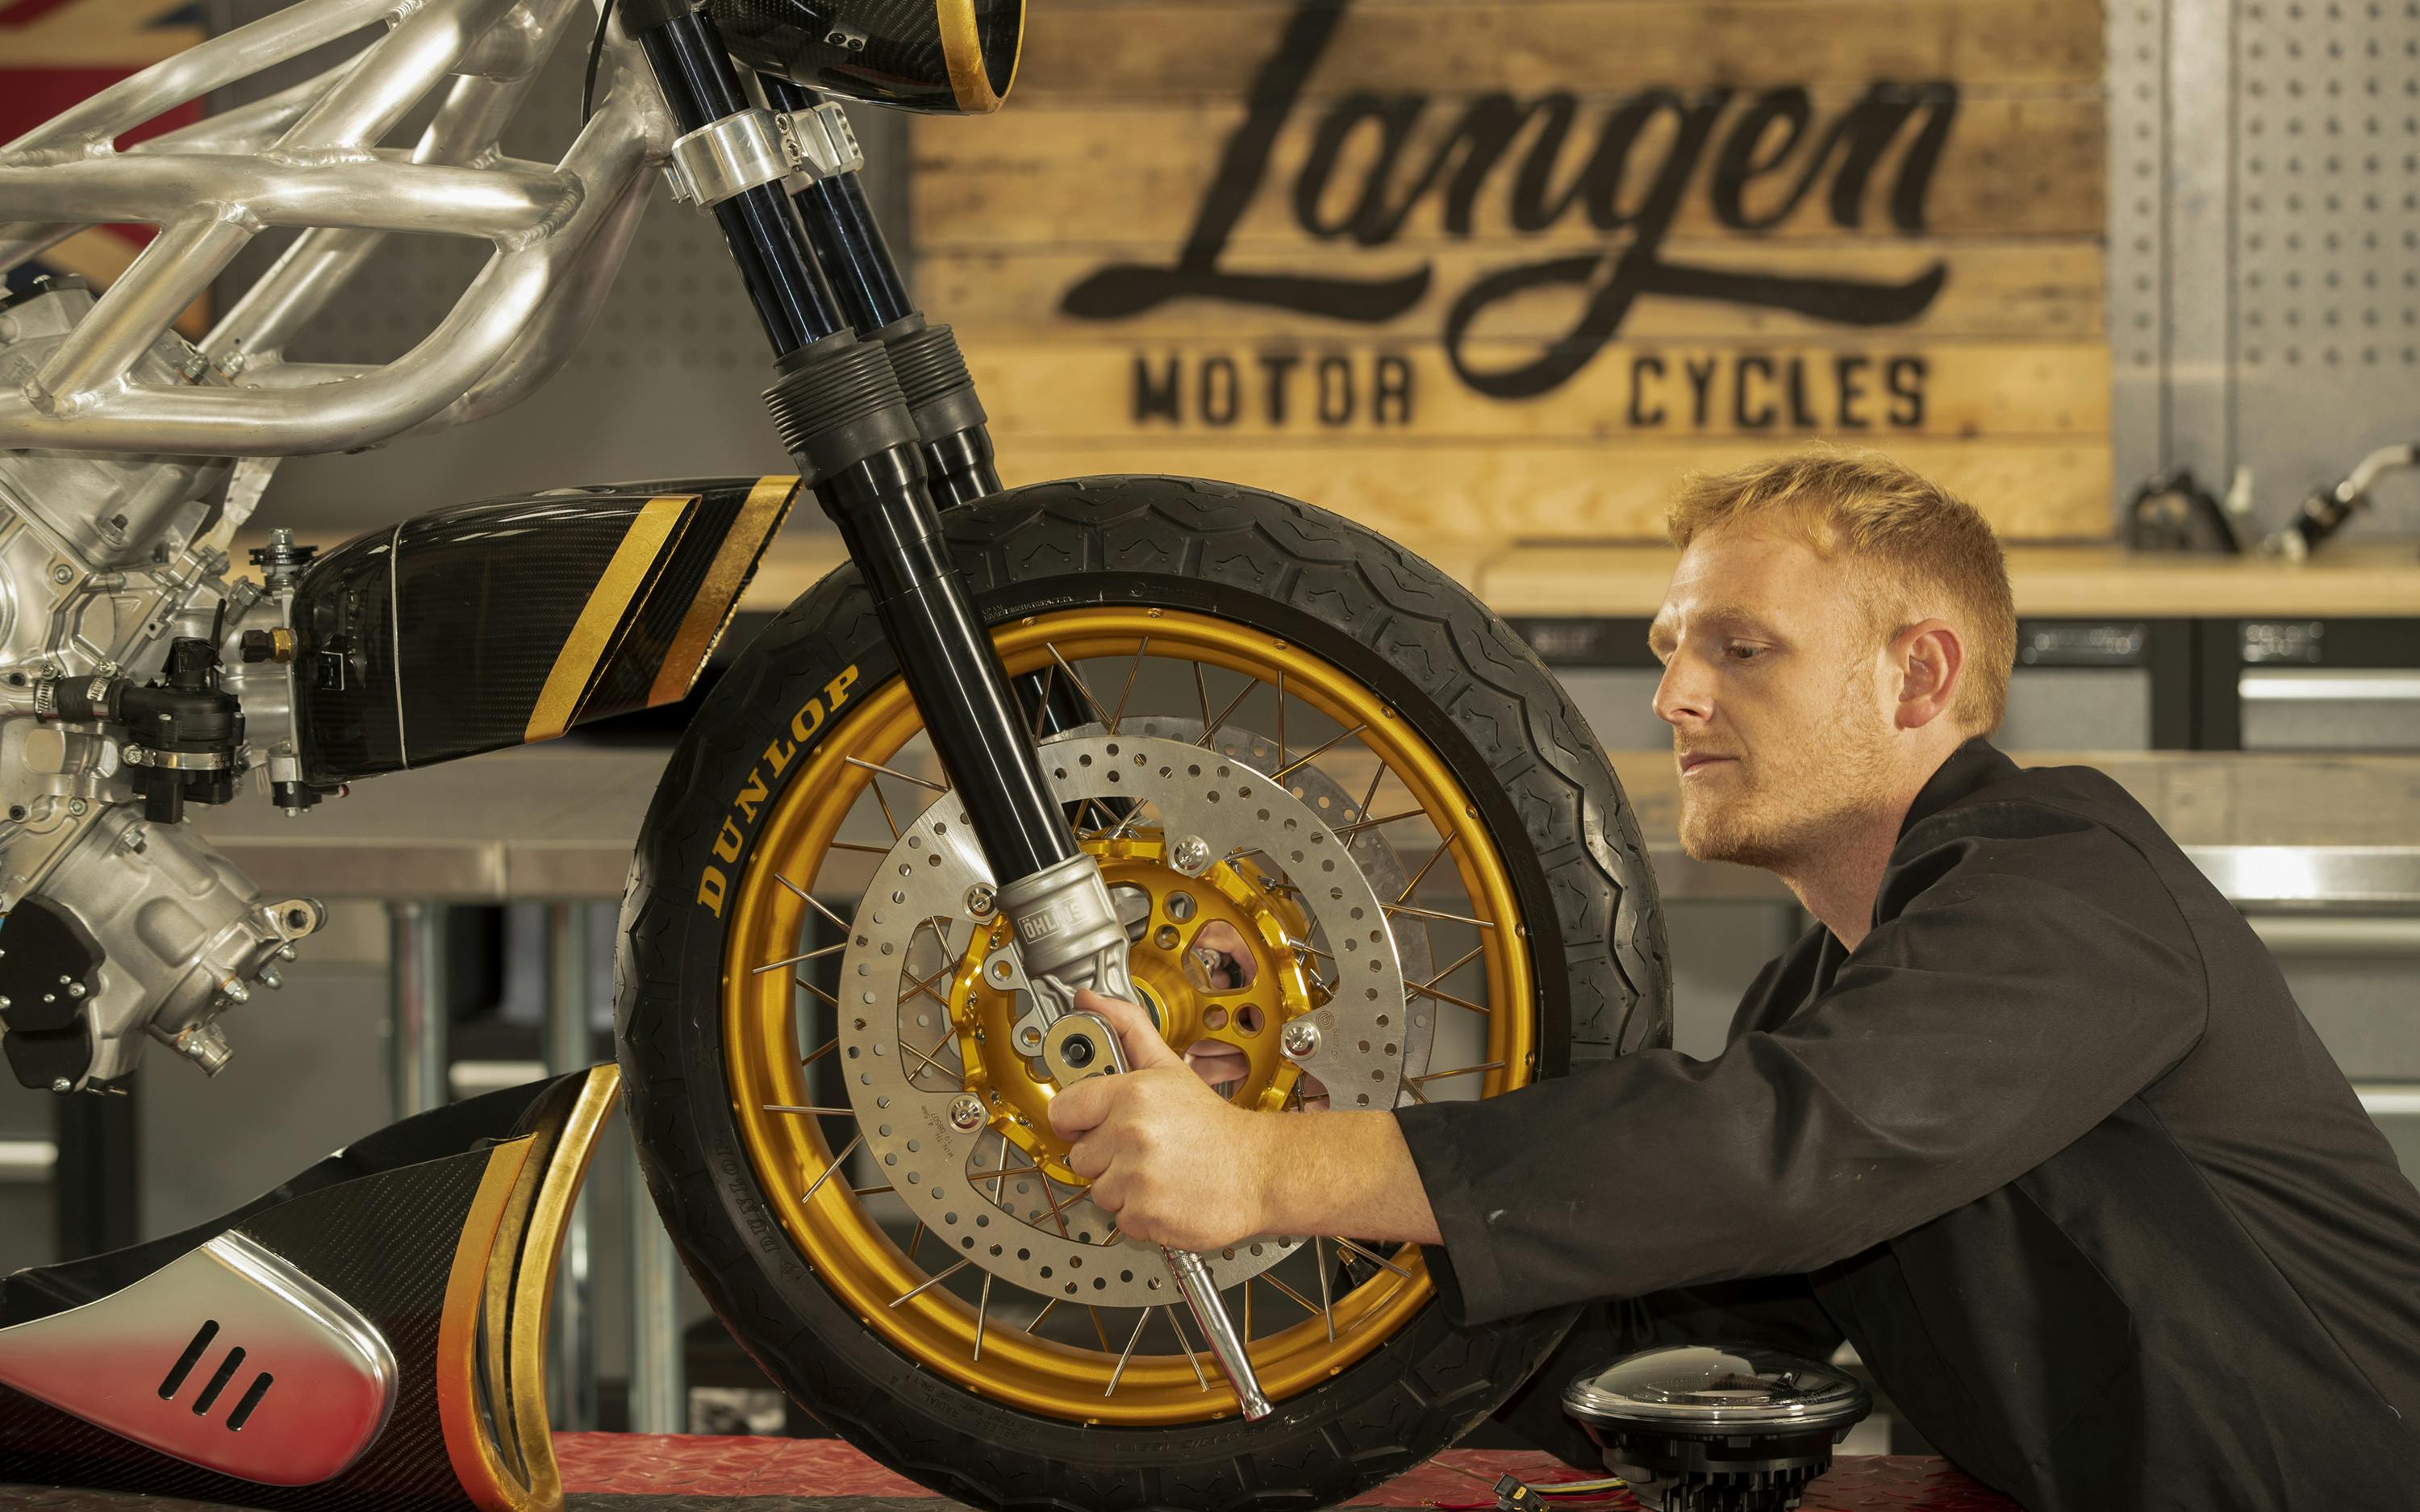 An engineer works on a motorcycle wheel